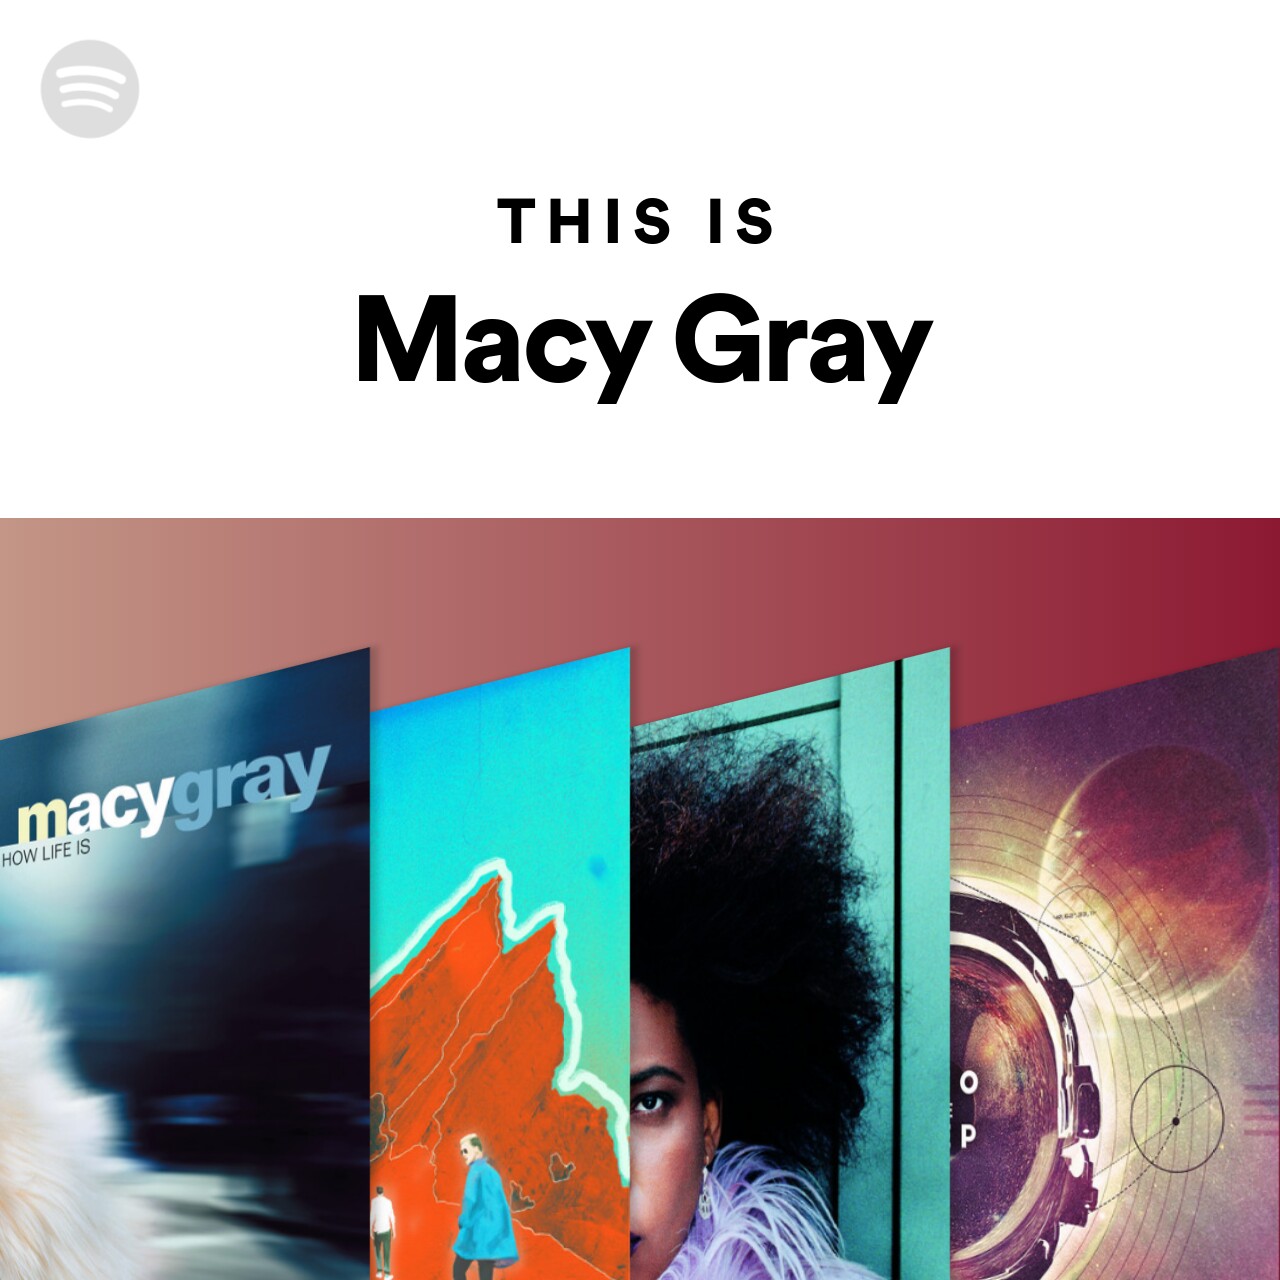 This Is Macy Gray